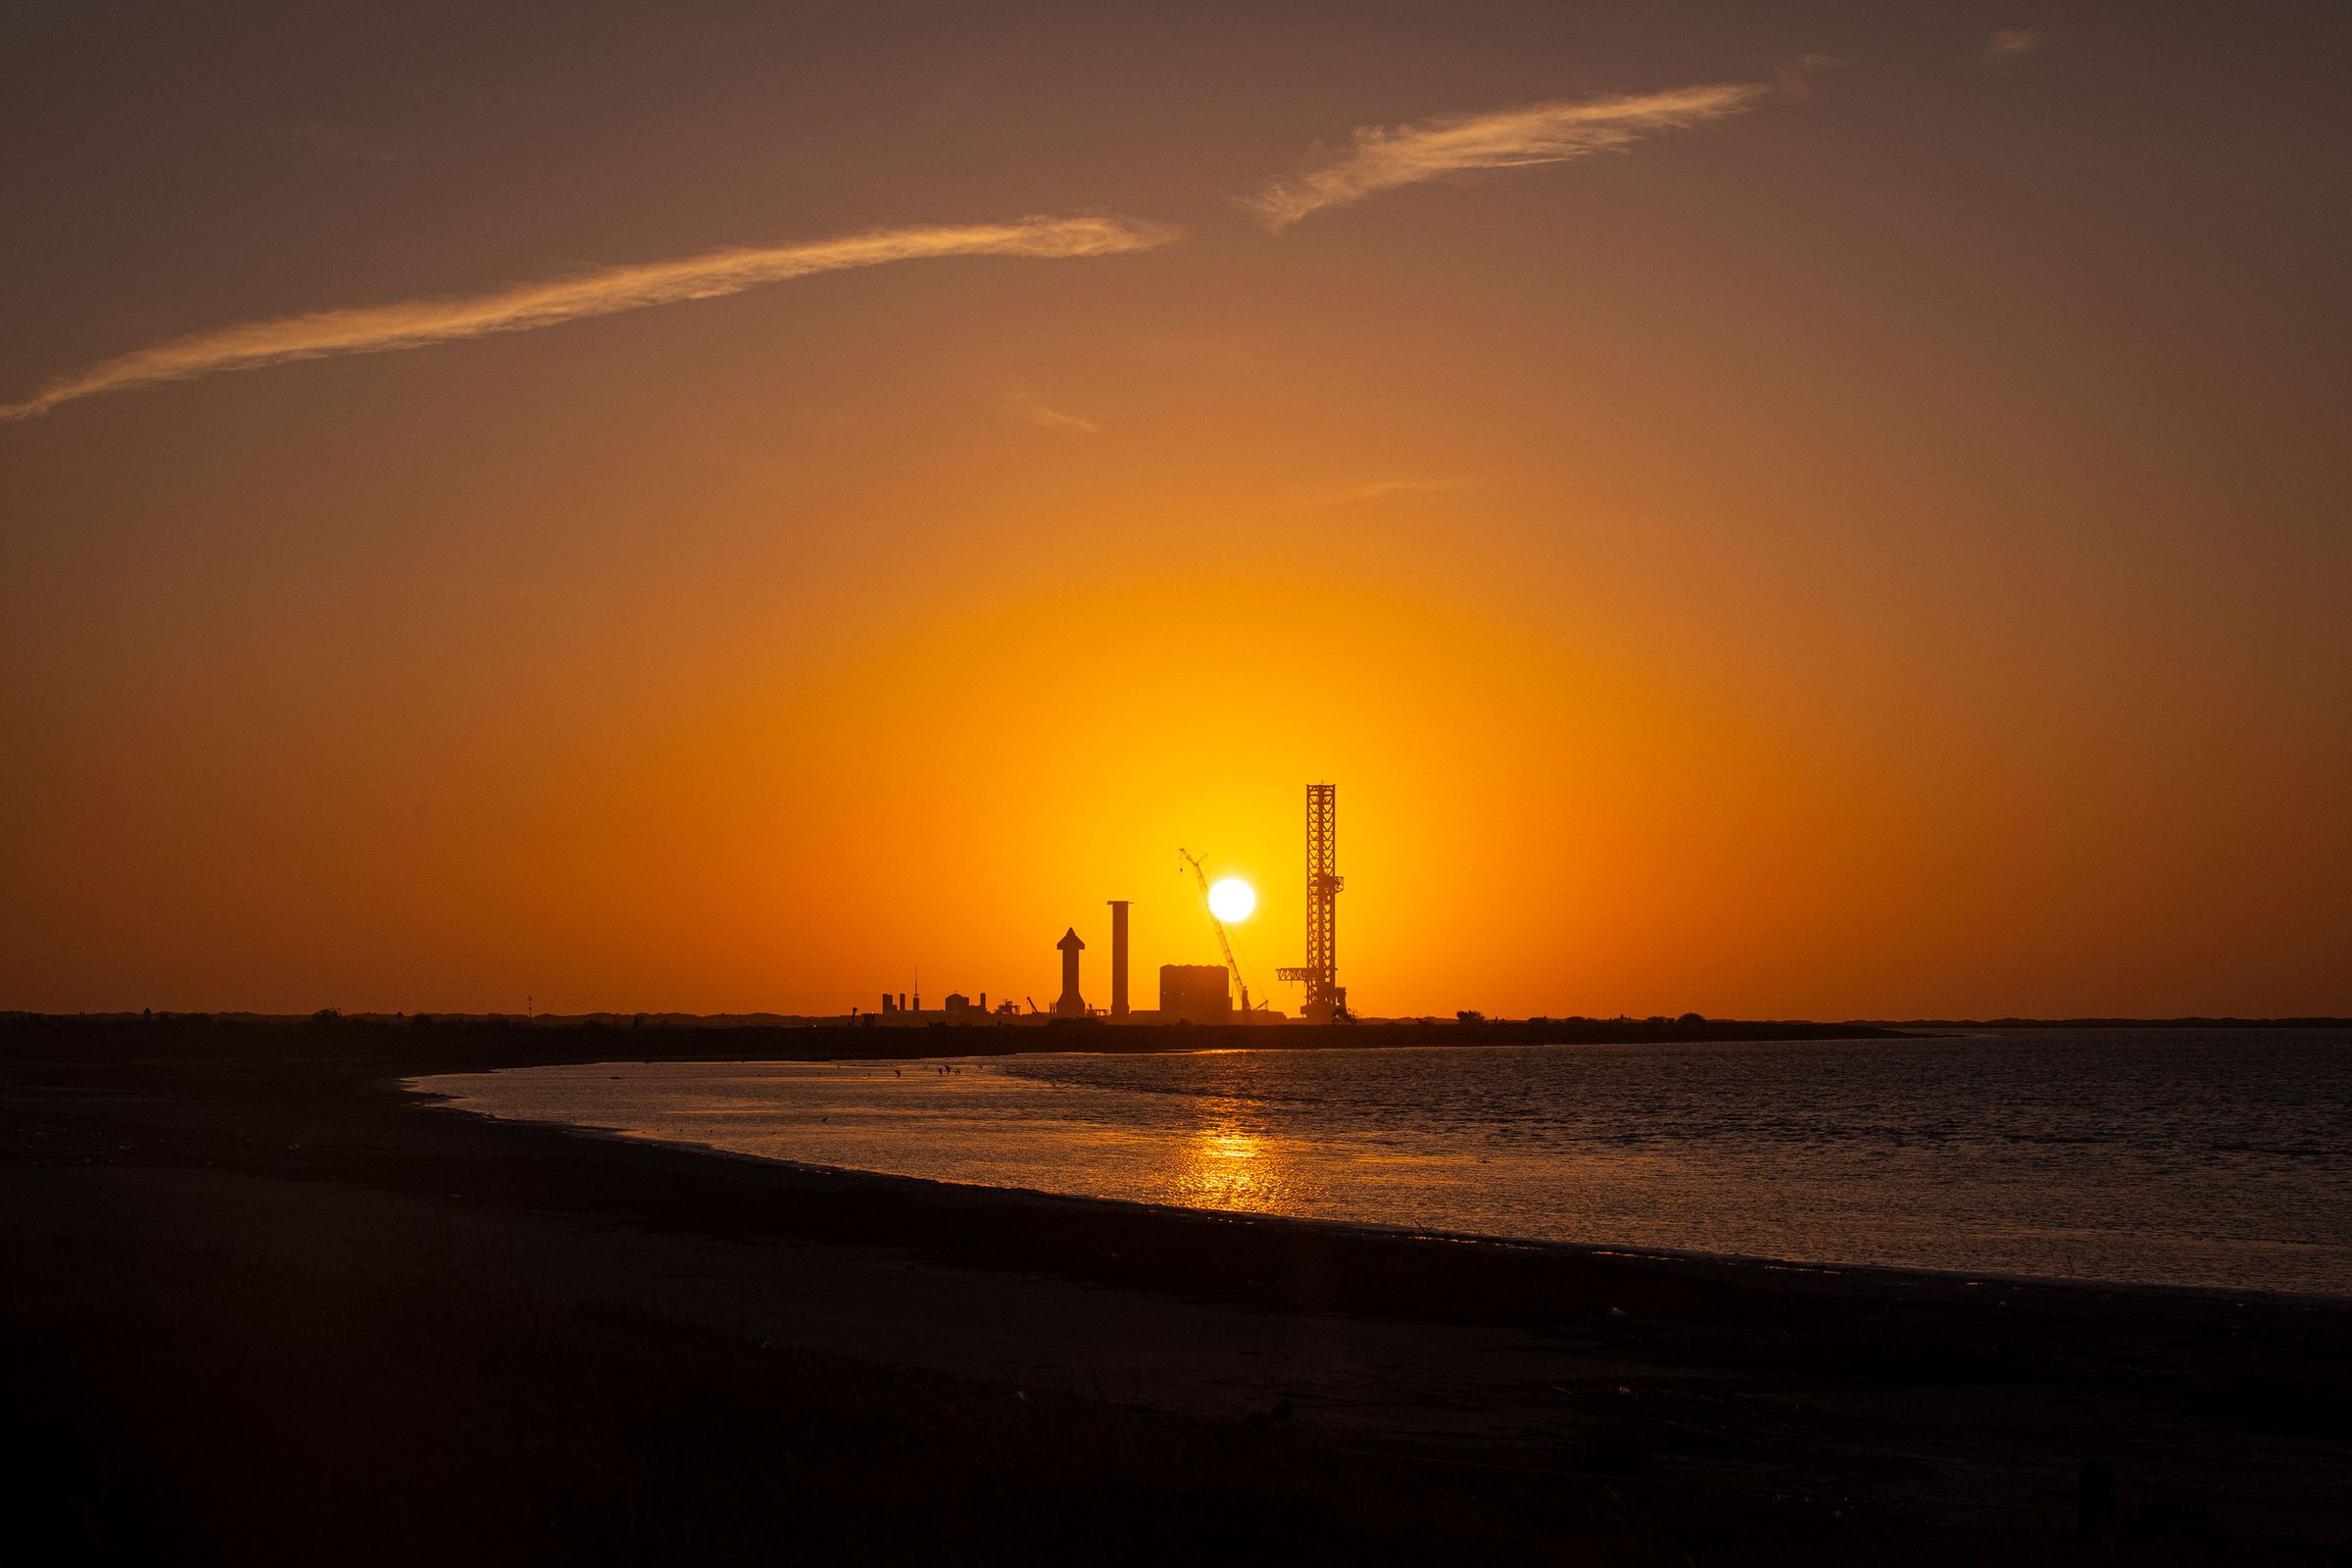 Sunrise behind SpaceX’s launch facility.